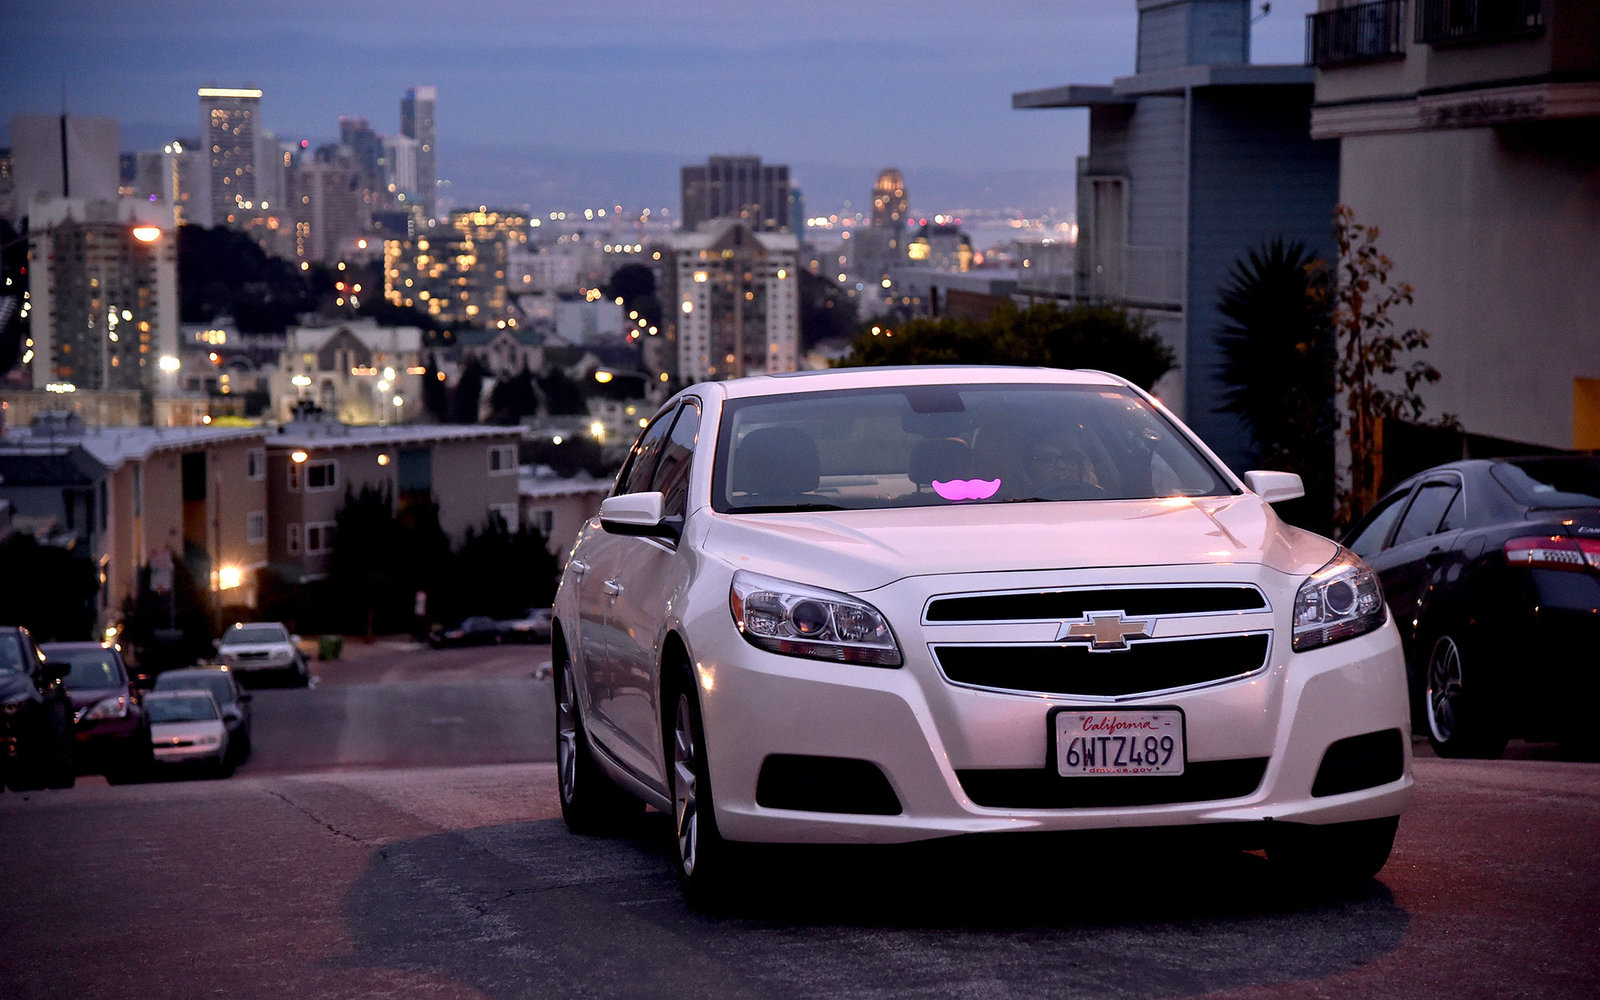 News: Your Lyft Could Be Driverless Within a Year, Report Says